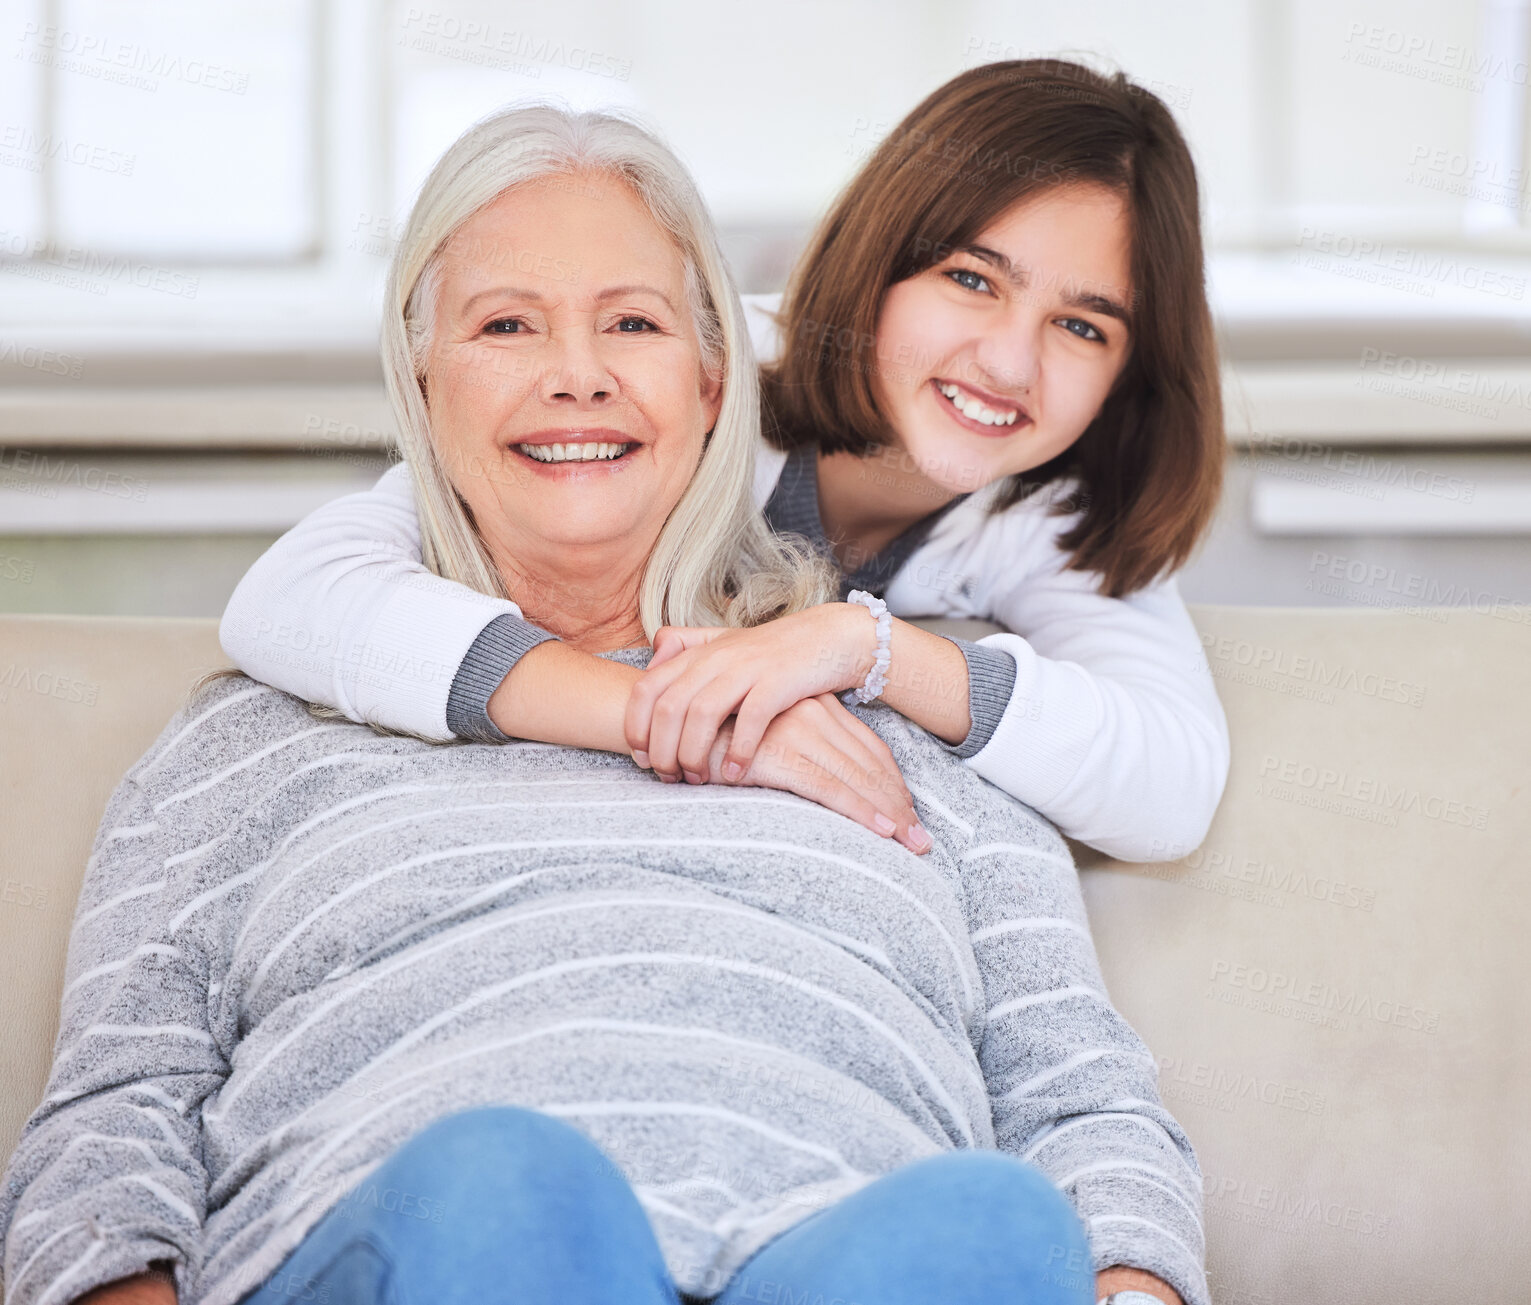 Buy stock photo Shot of a mature woman bonding with her grandchild on a sofa at home